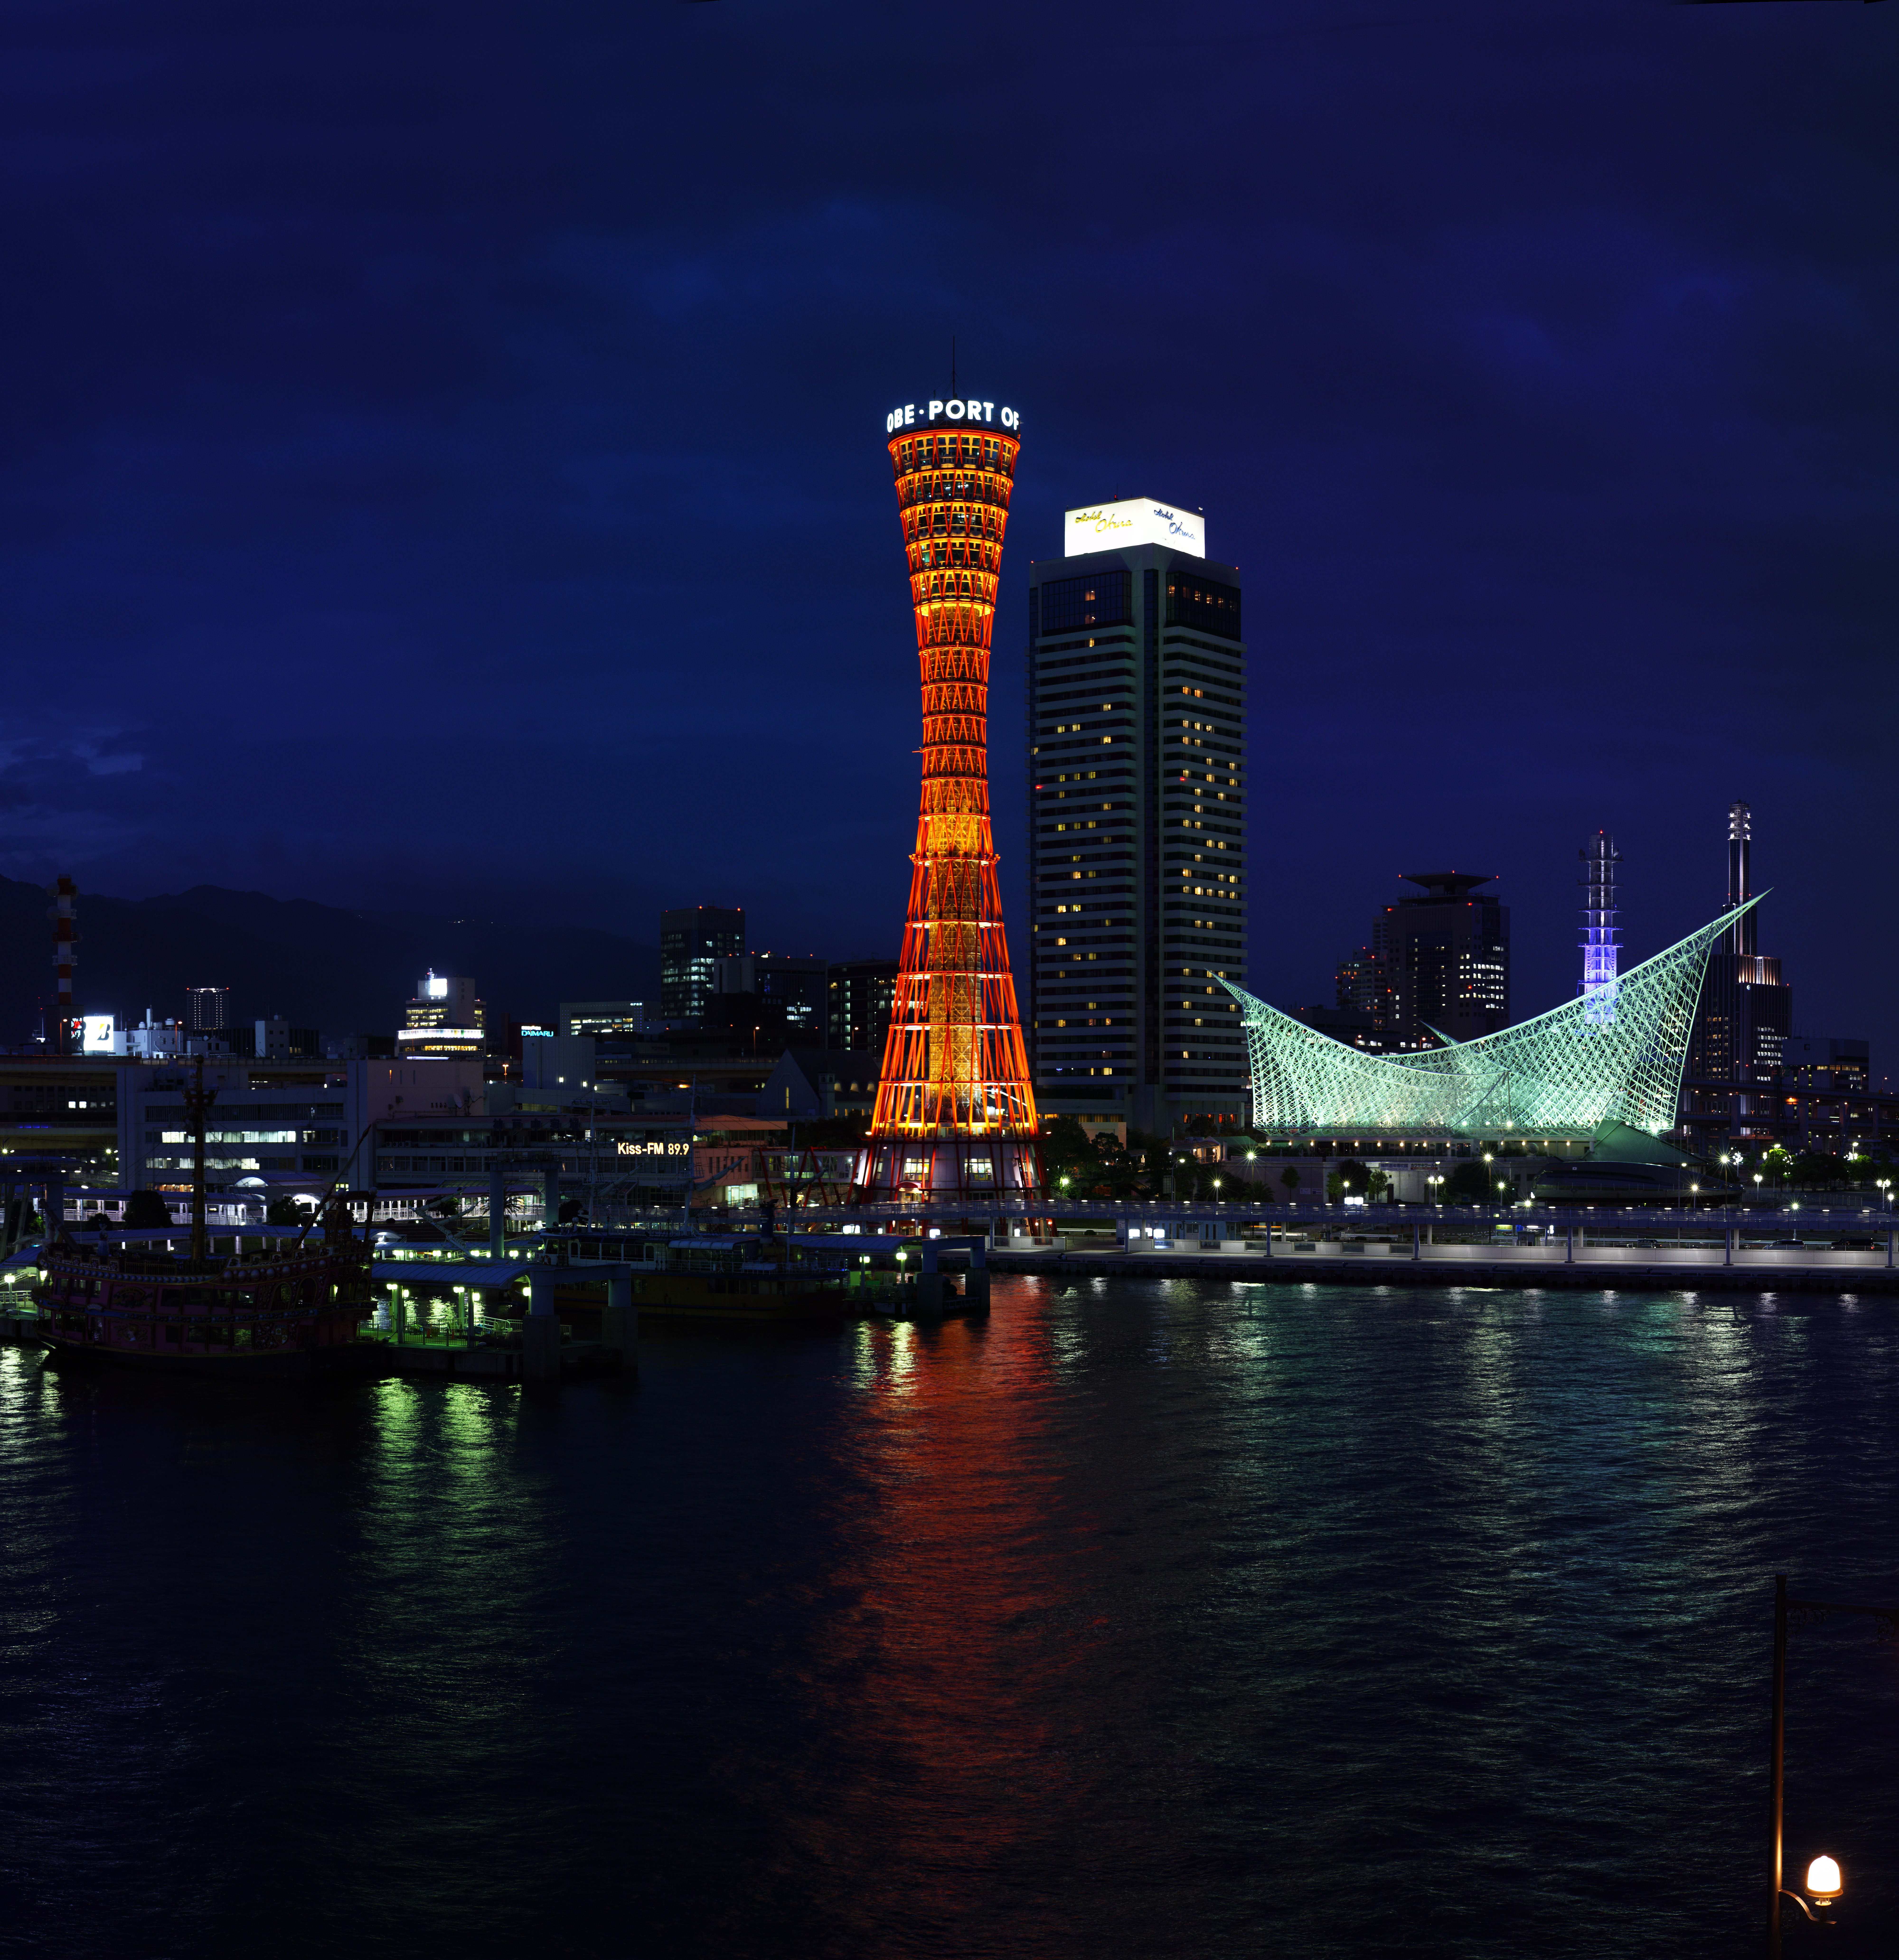 photo,material,free,landscape,picture,stock photo,Creative Commons,Kobe port night view, port, port tower, pleasure boat, tourist attraction